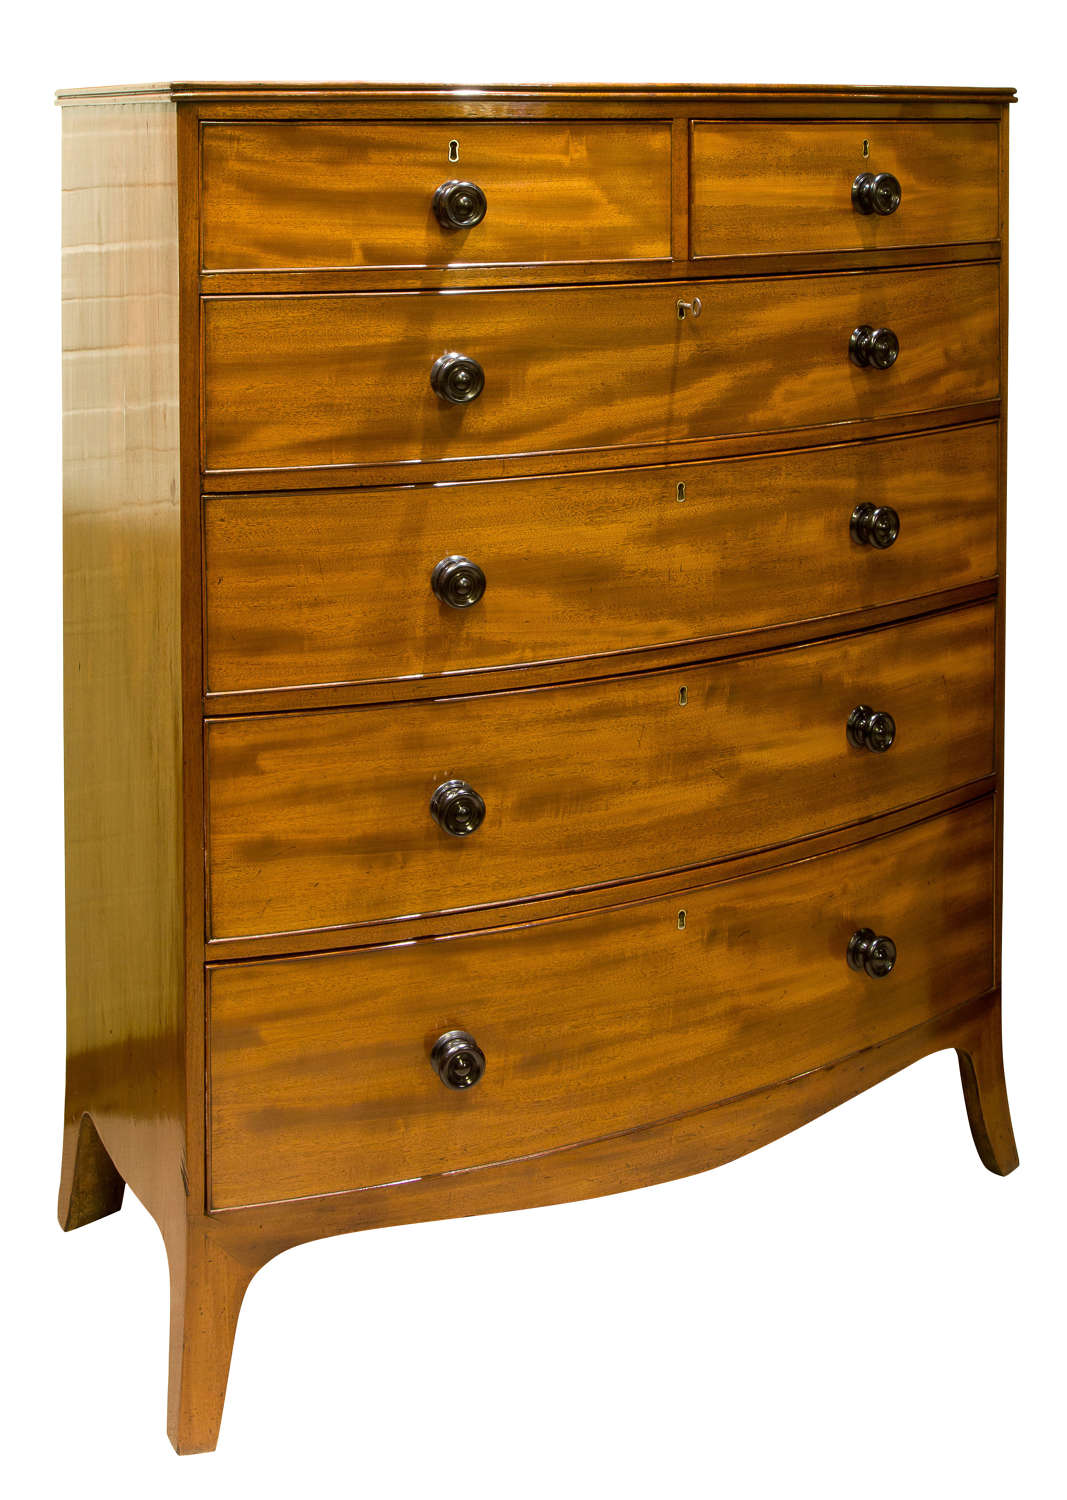 A tall mahogany bow fronted chest of drawers